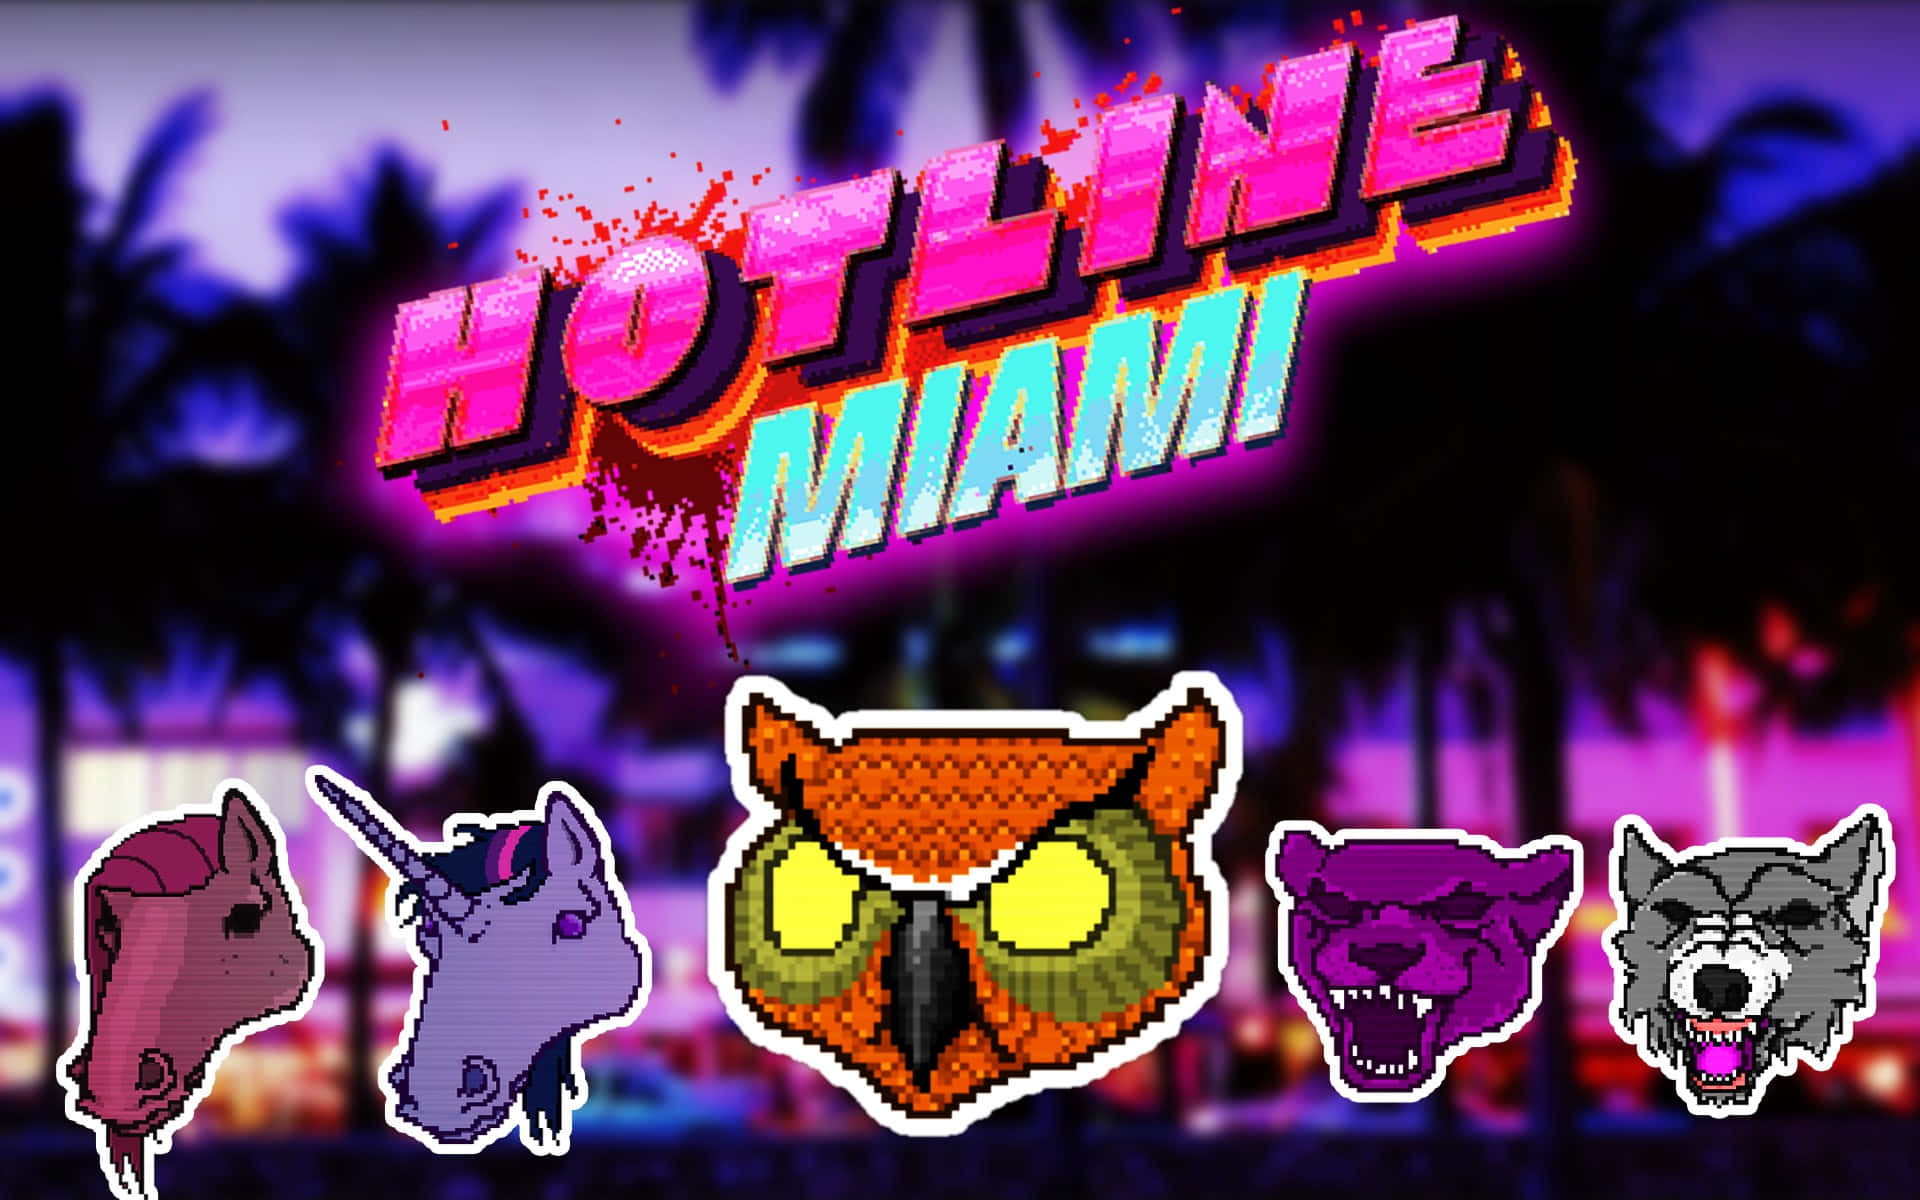 Hotline Miami - Action-packed video game scene